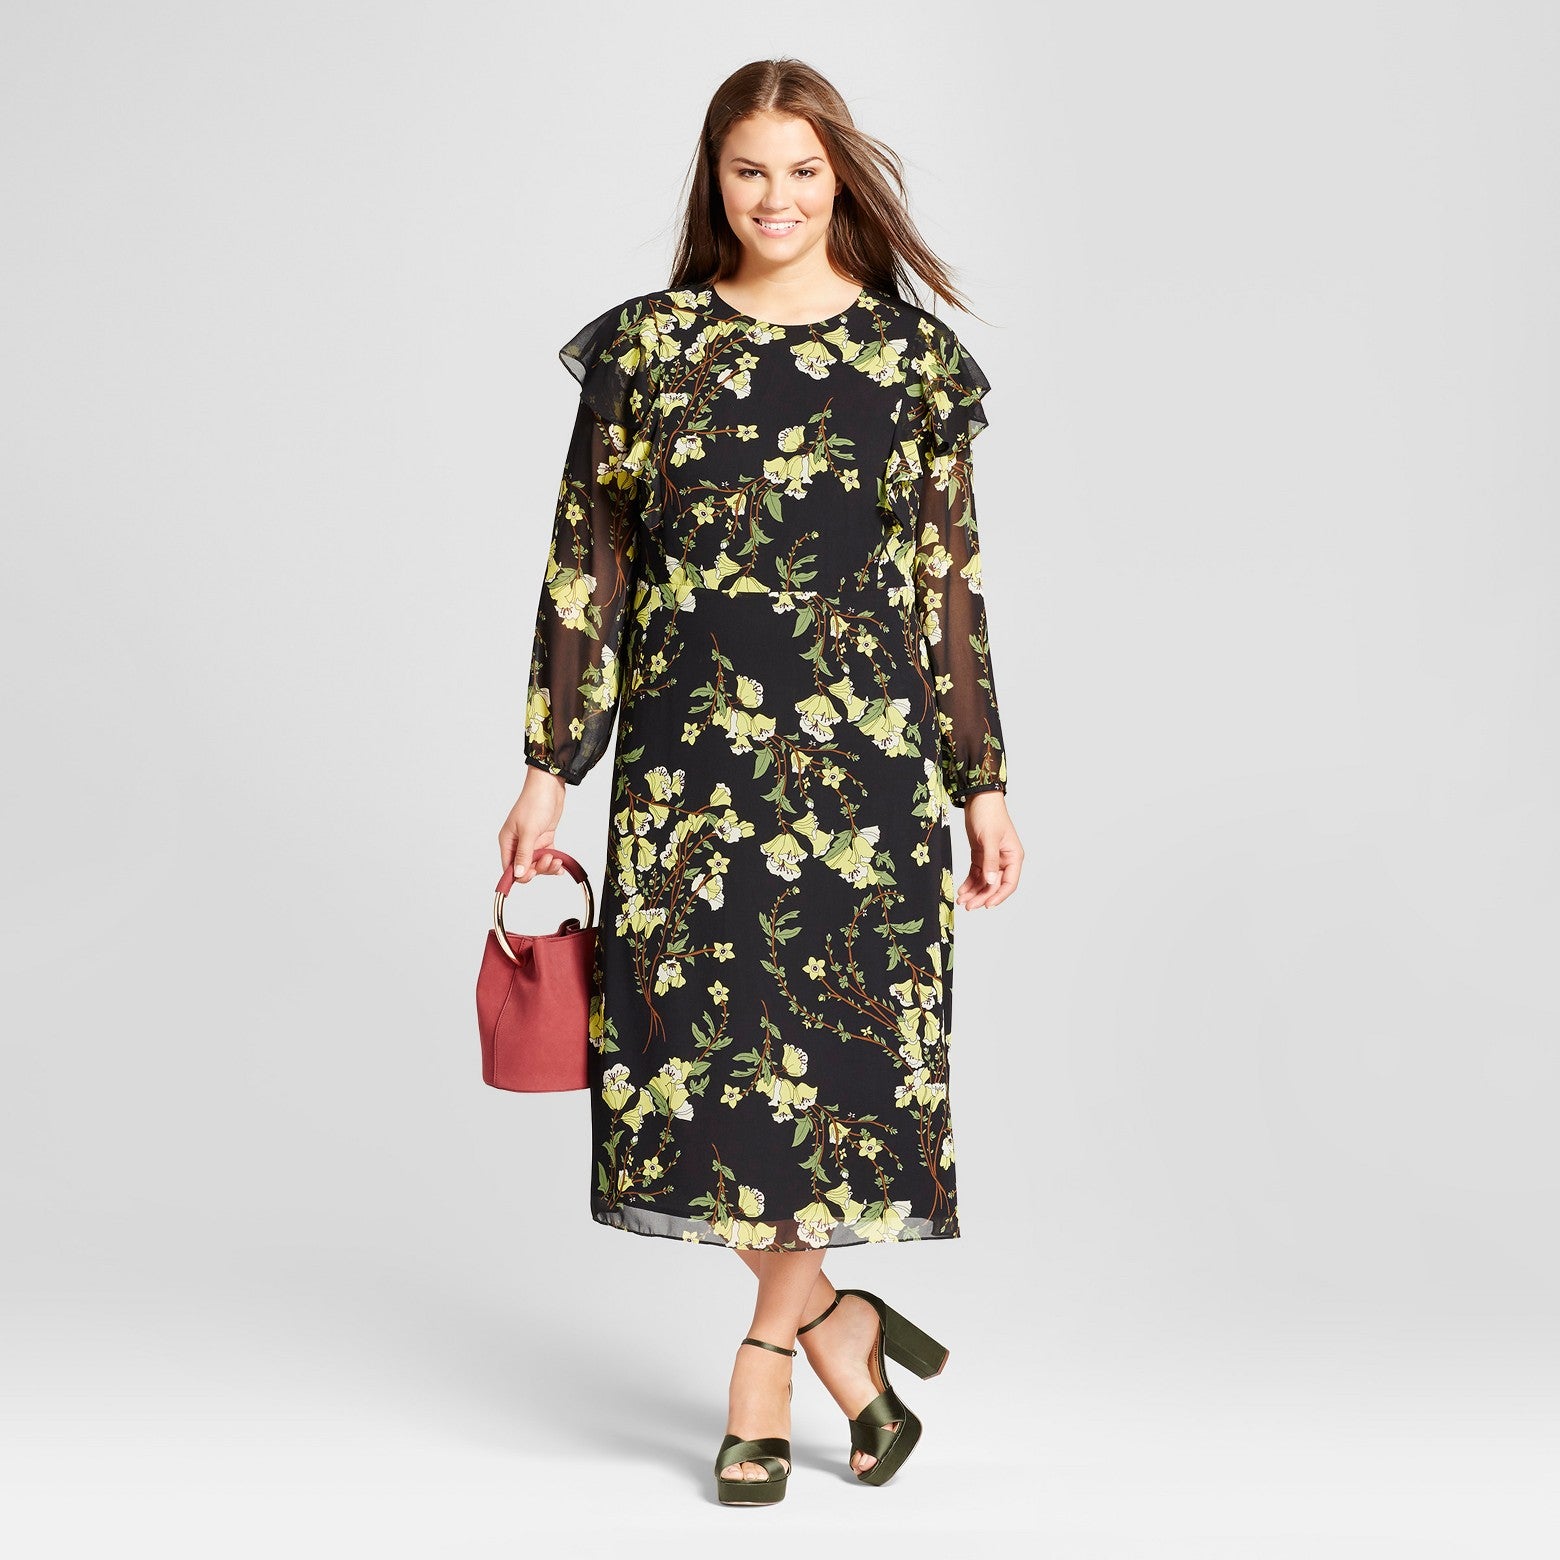 11 Curve-Friendly Holiday Dresses From Target
